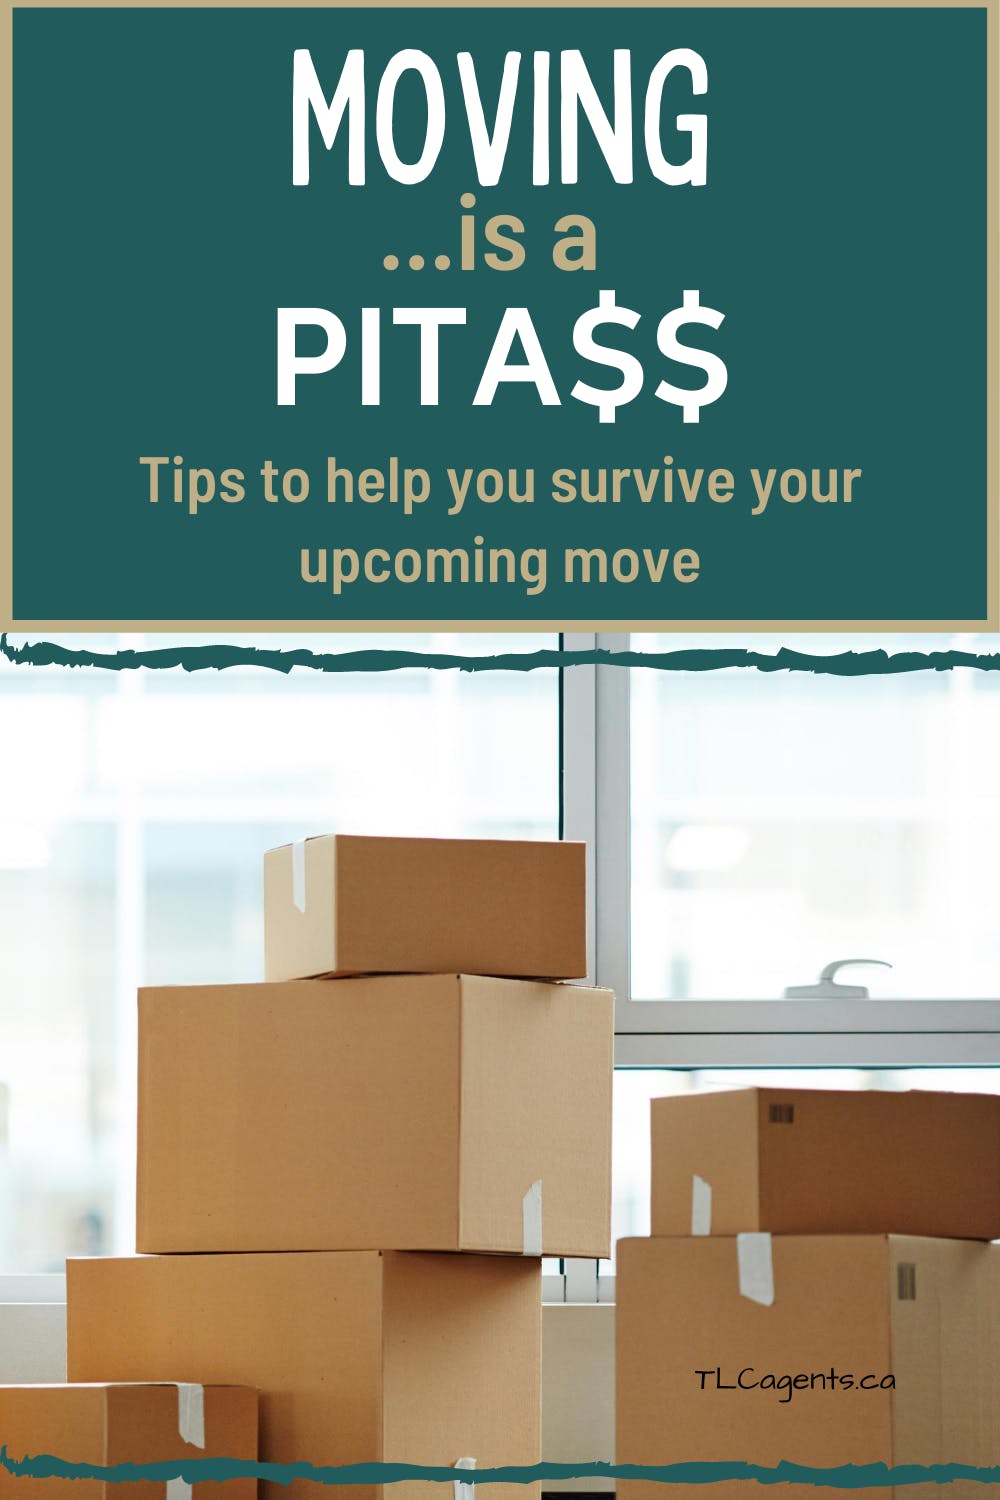 Moving is Hard and a PITA$$